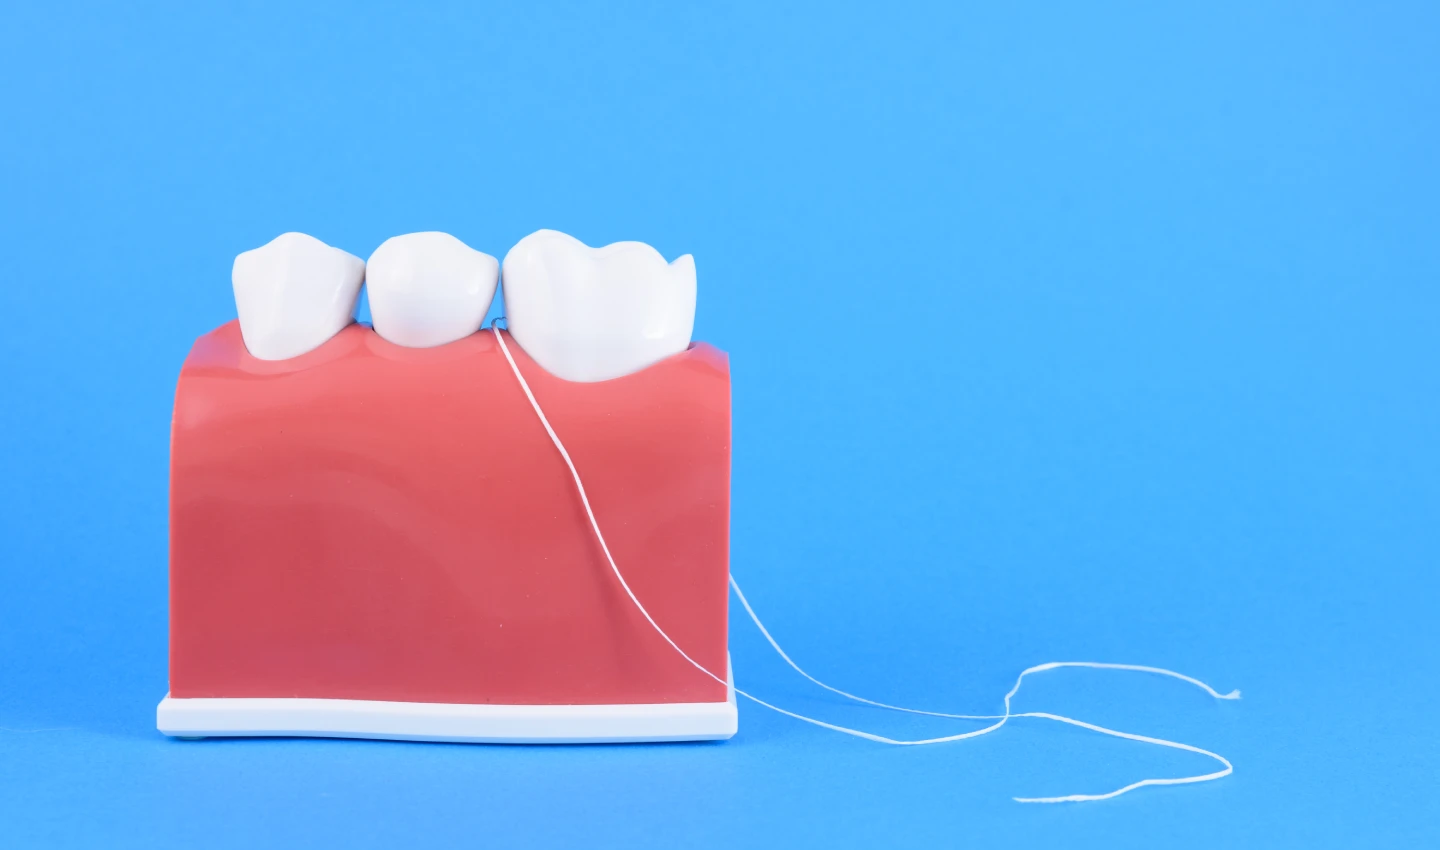 Image showing dental floss being used between teeth to demonstrate proper dental flossing techniques for optimal oral health.